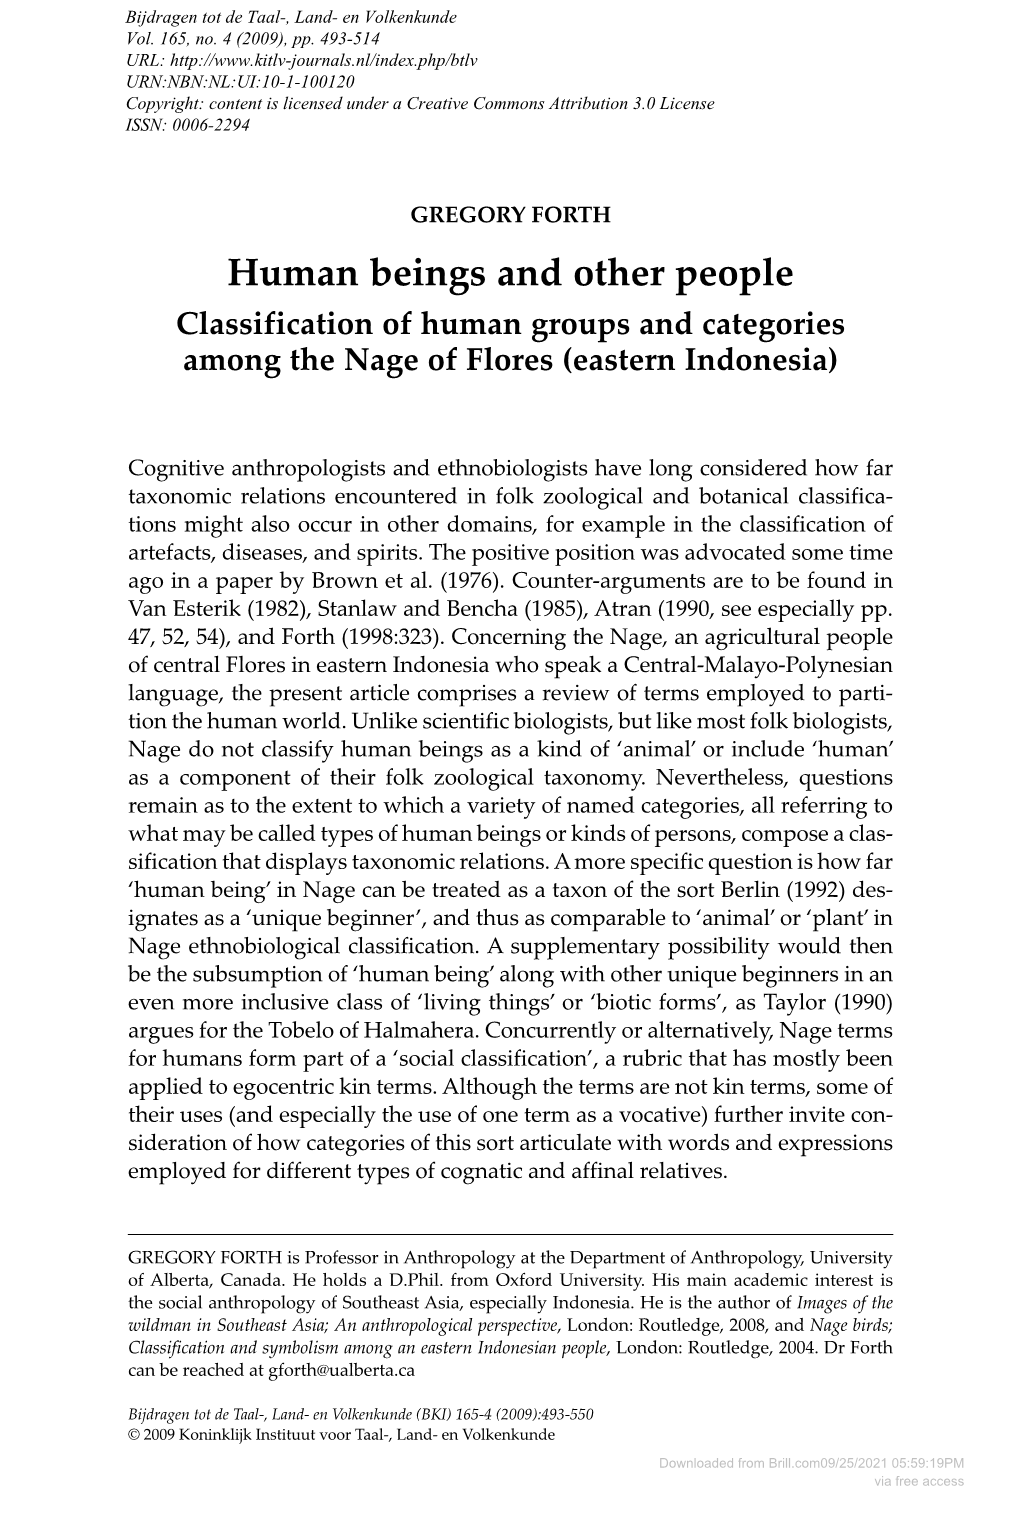 Human Beings and Other People Classification of Human Groups and Categories Among the Nage of Flores (Eastern Indonesia)